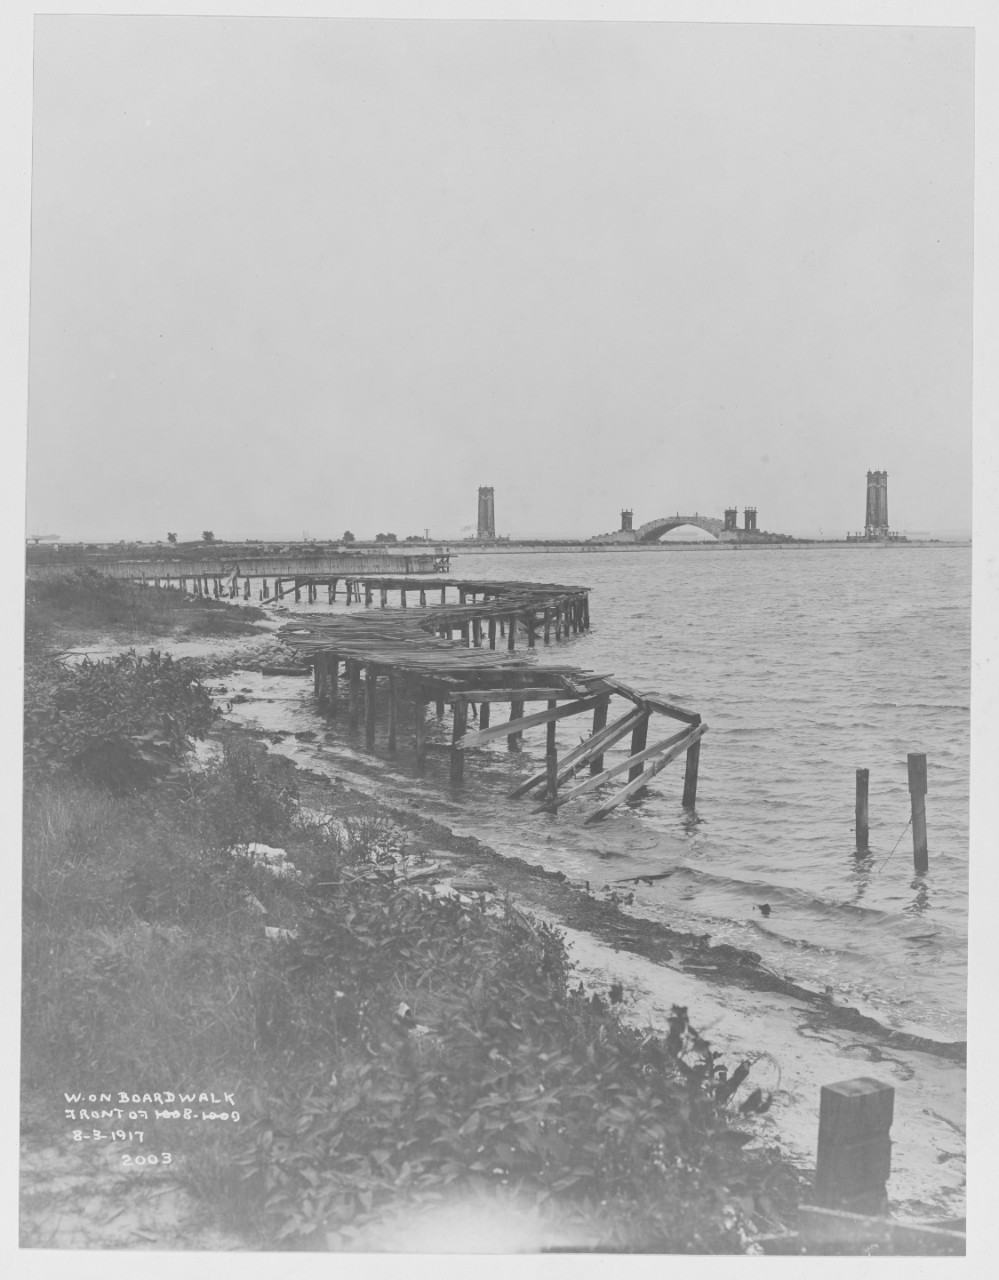 West on boardwalk, showing arch in the background.